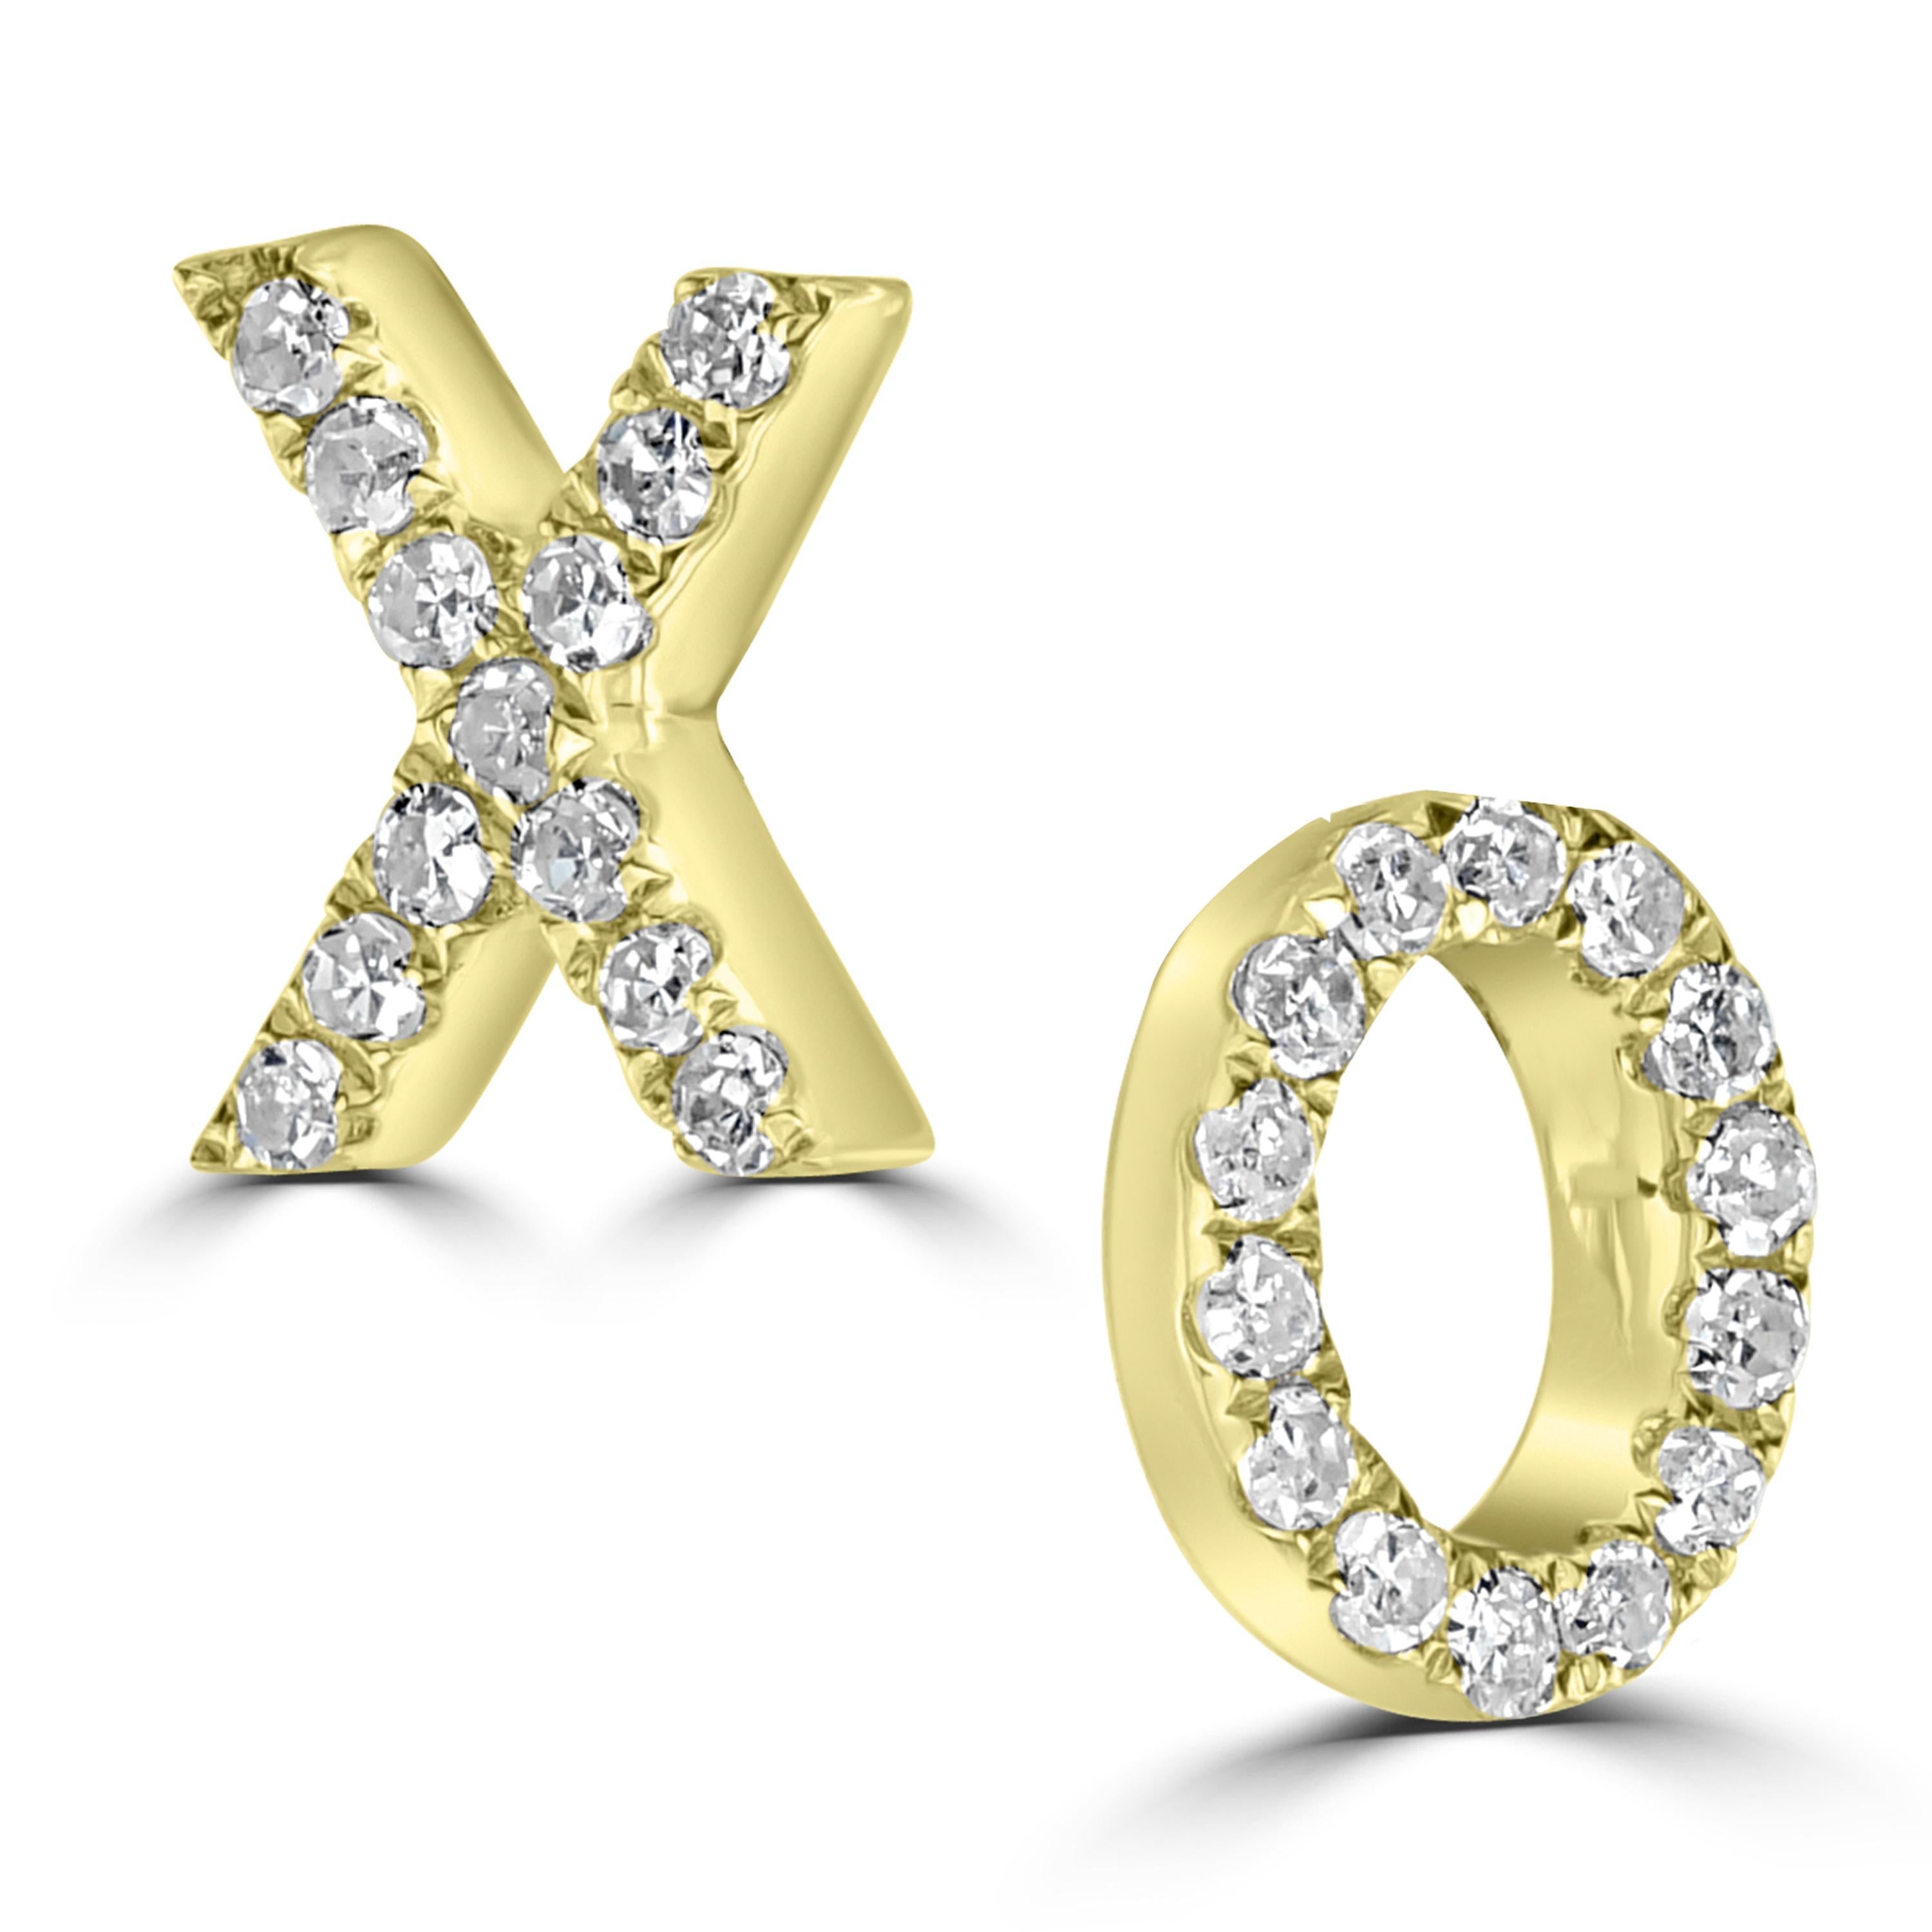 A unique but chic addition to your wardrobe. These Luxle fashionable X O studs are studded with 27 round diamonds on pave. They come with gold posts and clutch backs.

Please follow the Luxury Jewels storefront to view the latest collections &